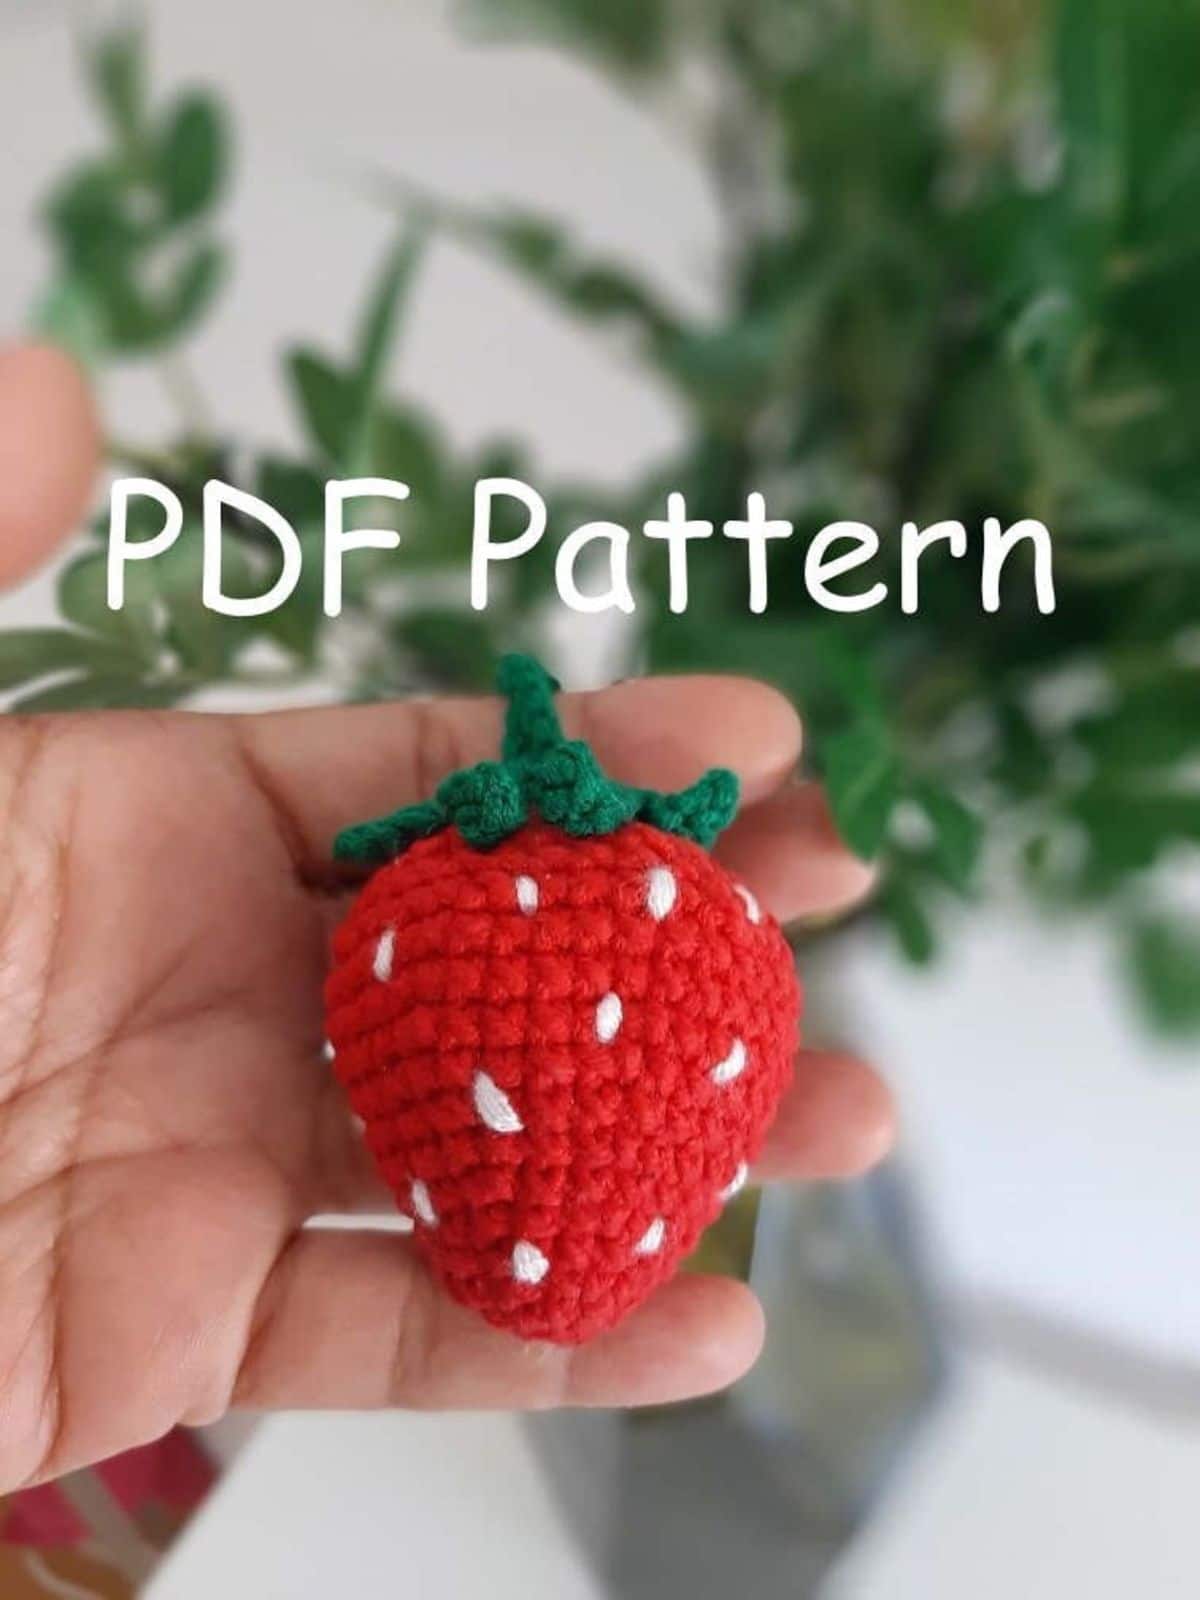 Small crochet strawberry with white seeds stitched in and a green stem laying on a hand with a white background with green foliage. 